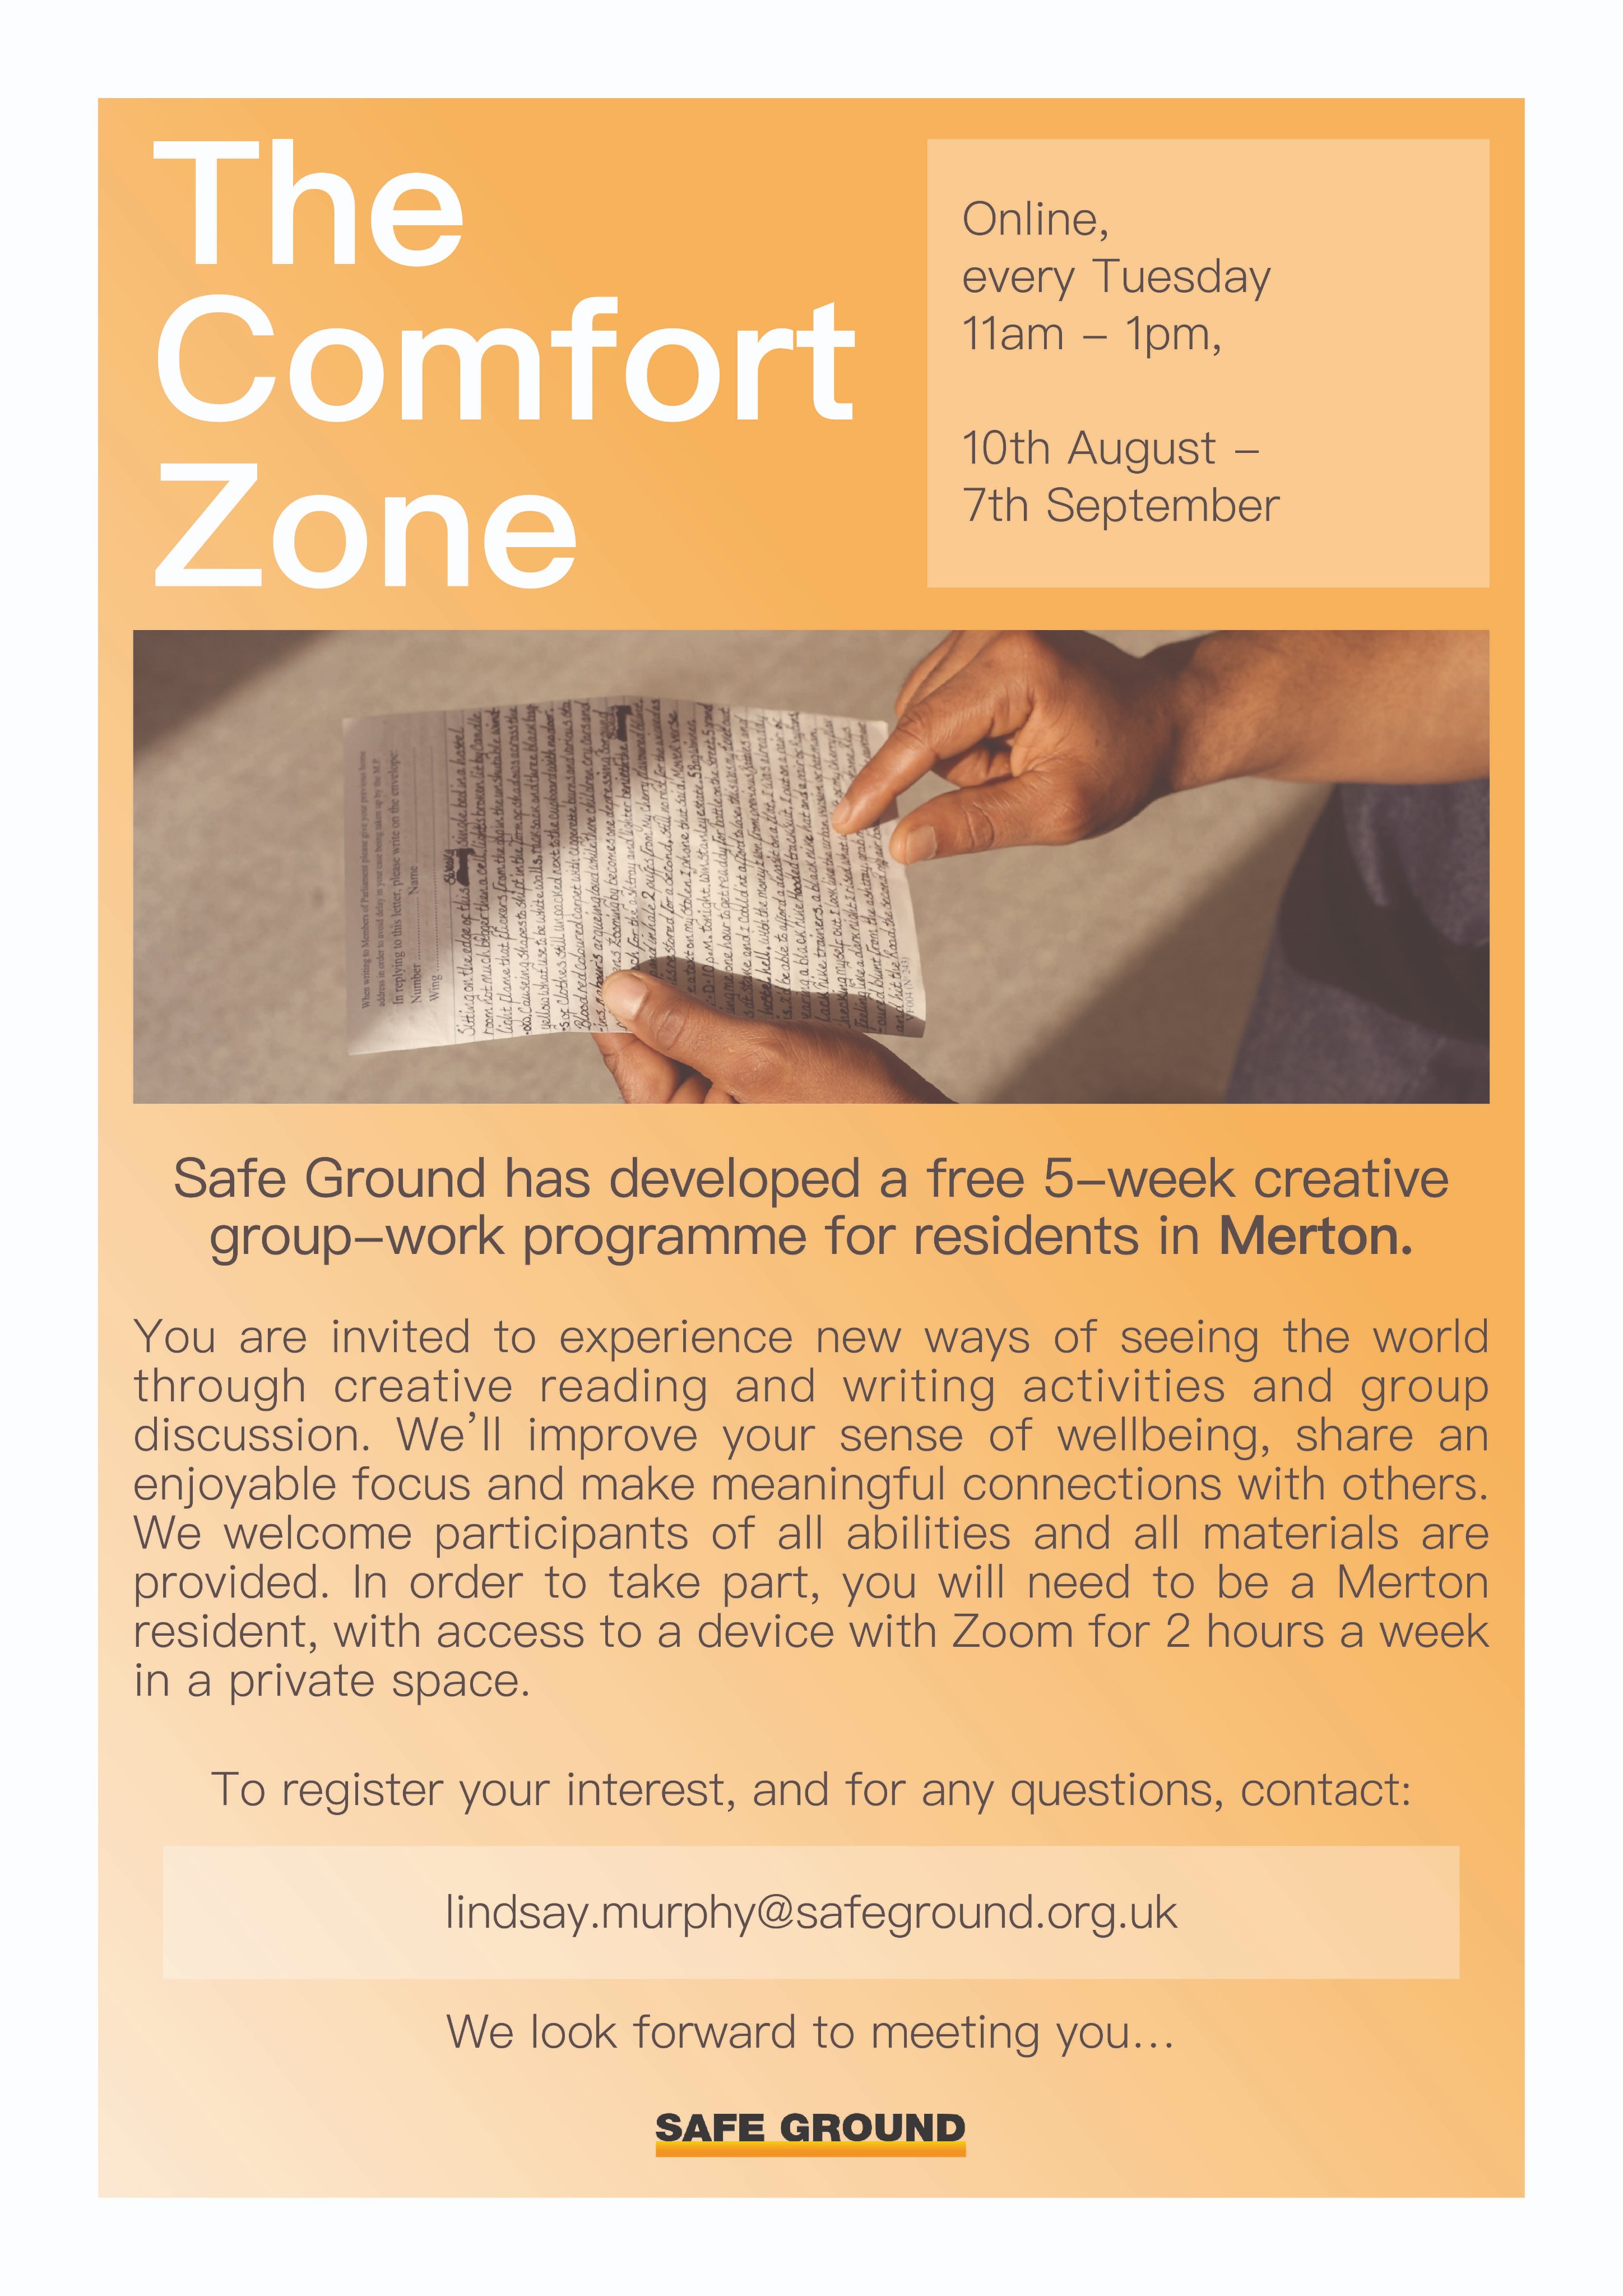 Ground Twitter: "The Comfort Zone returns 10th August!! This is a creative wellbeing programme, open all residents in #Merton and self referrals are welcomed! To register your interest